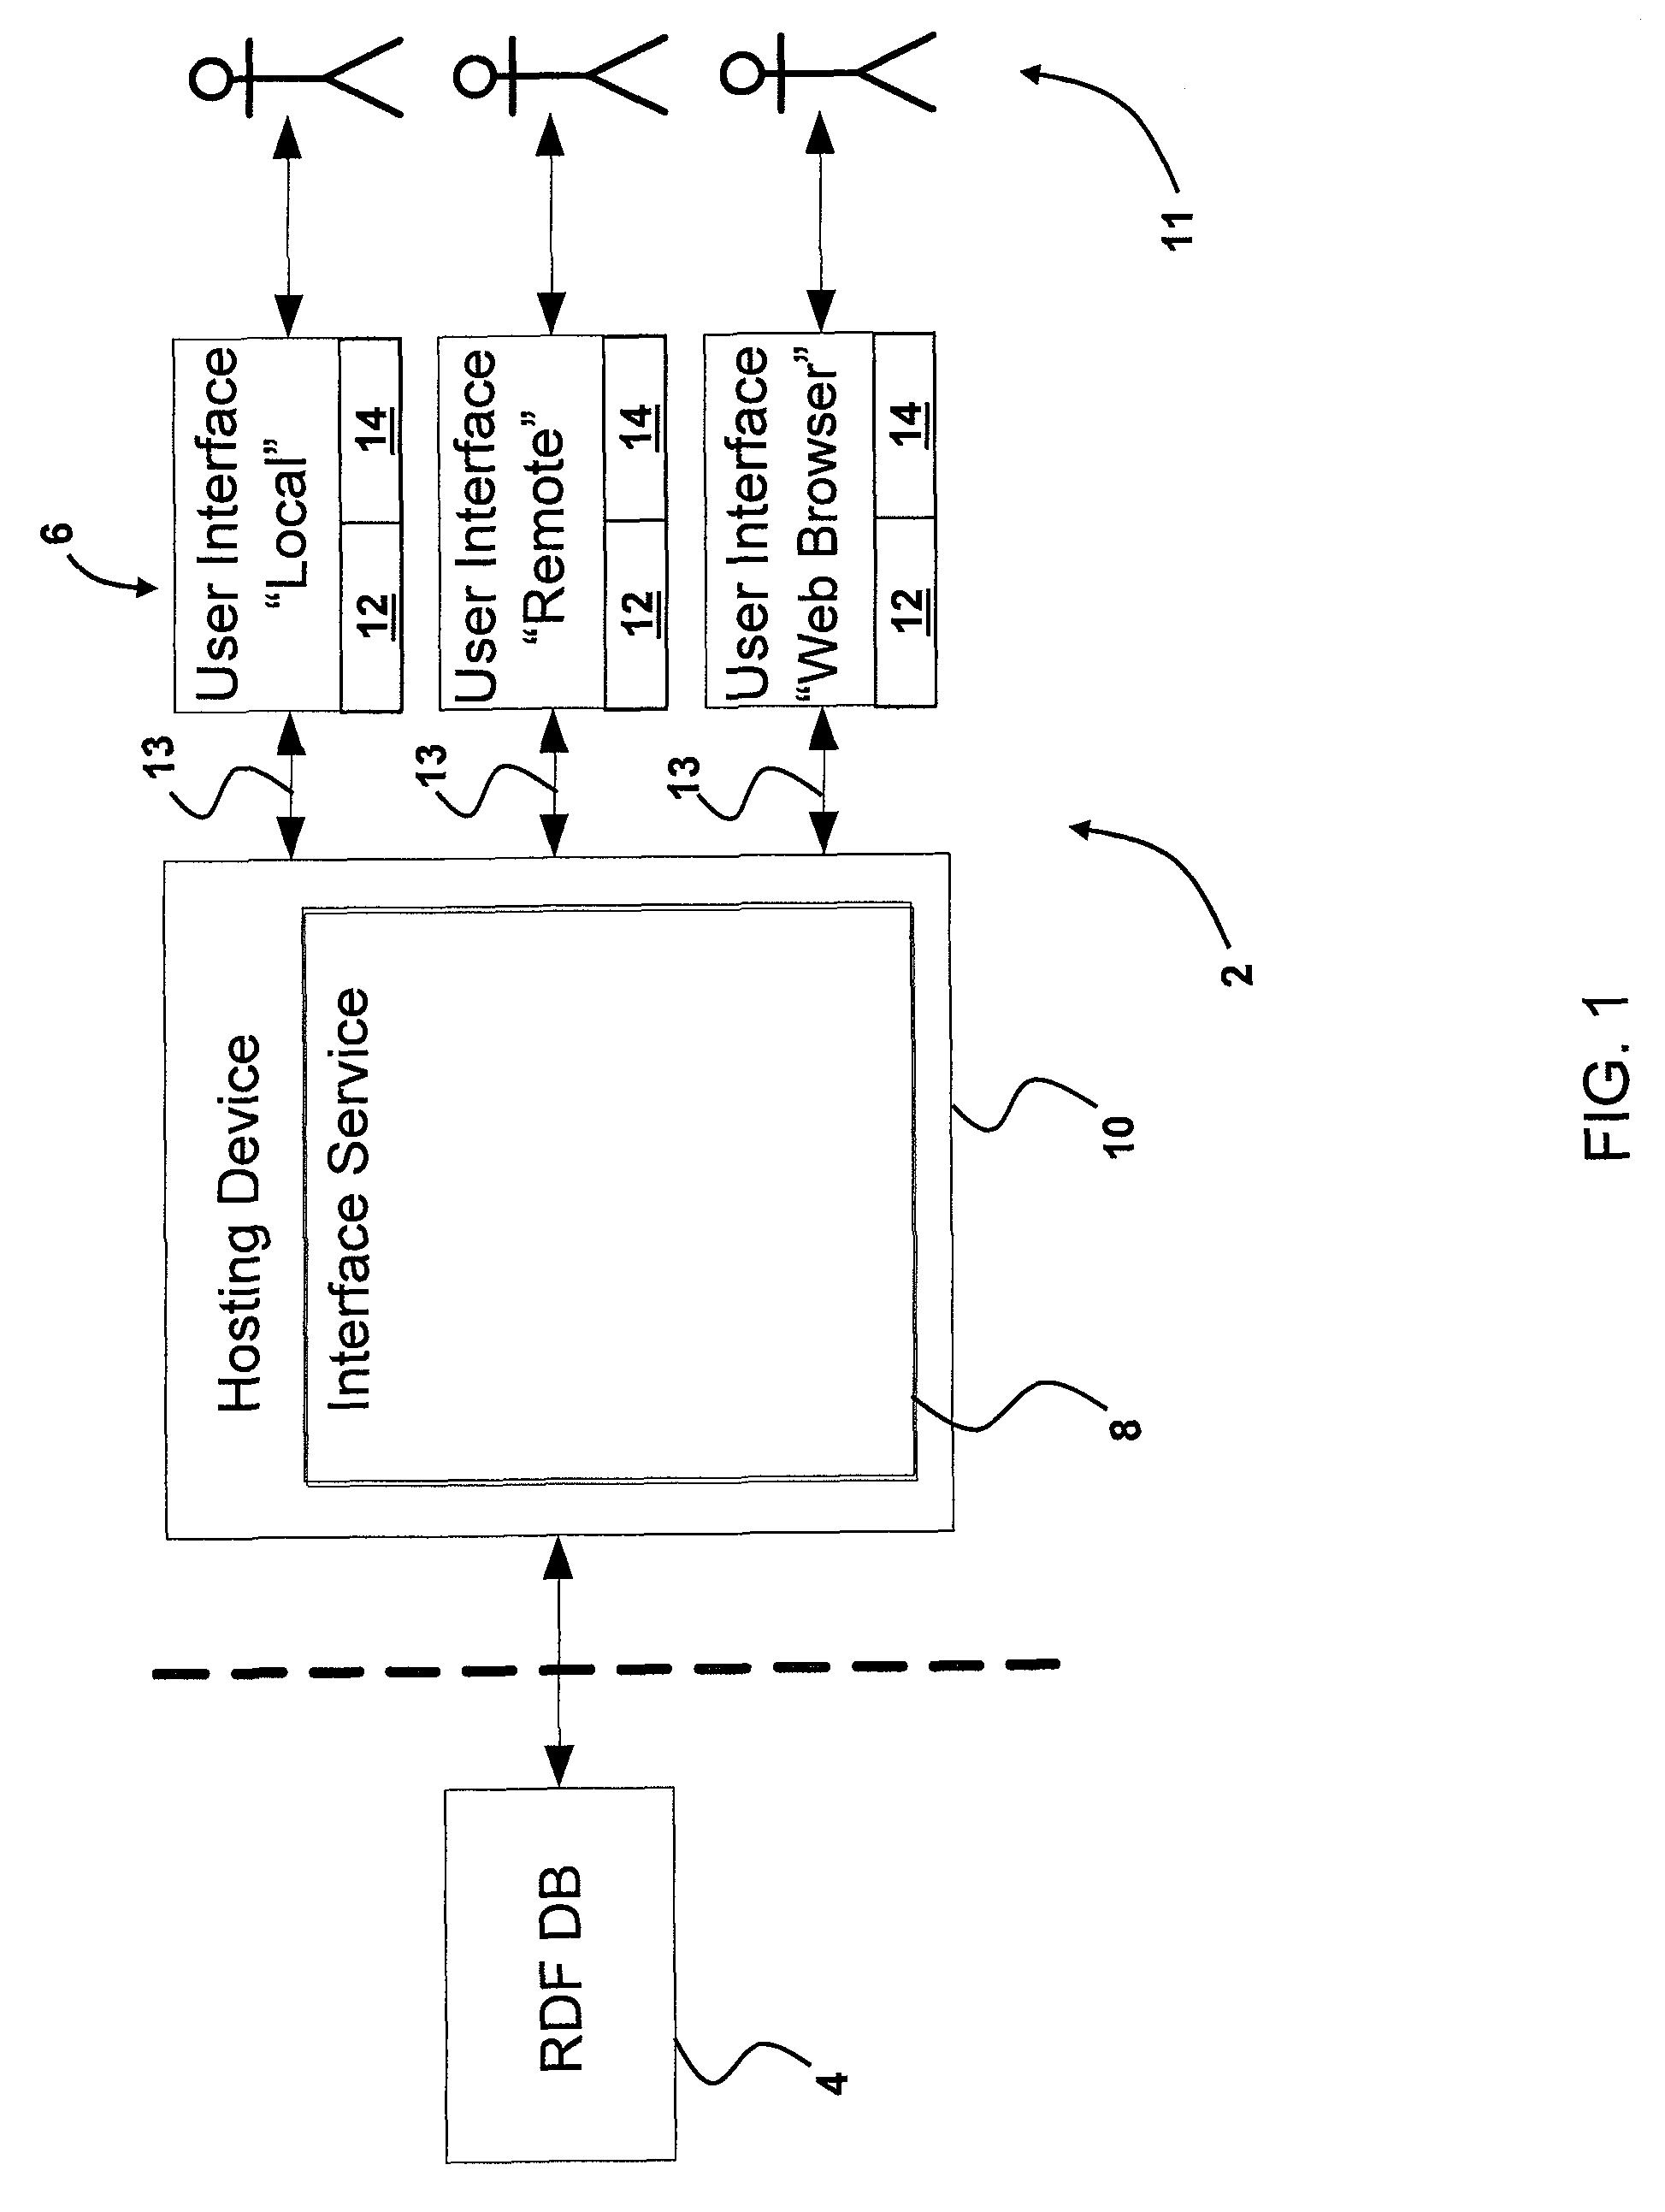 User interface and methods for building structural queries